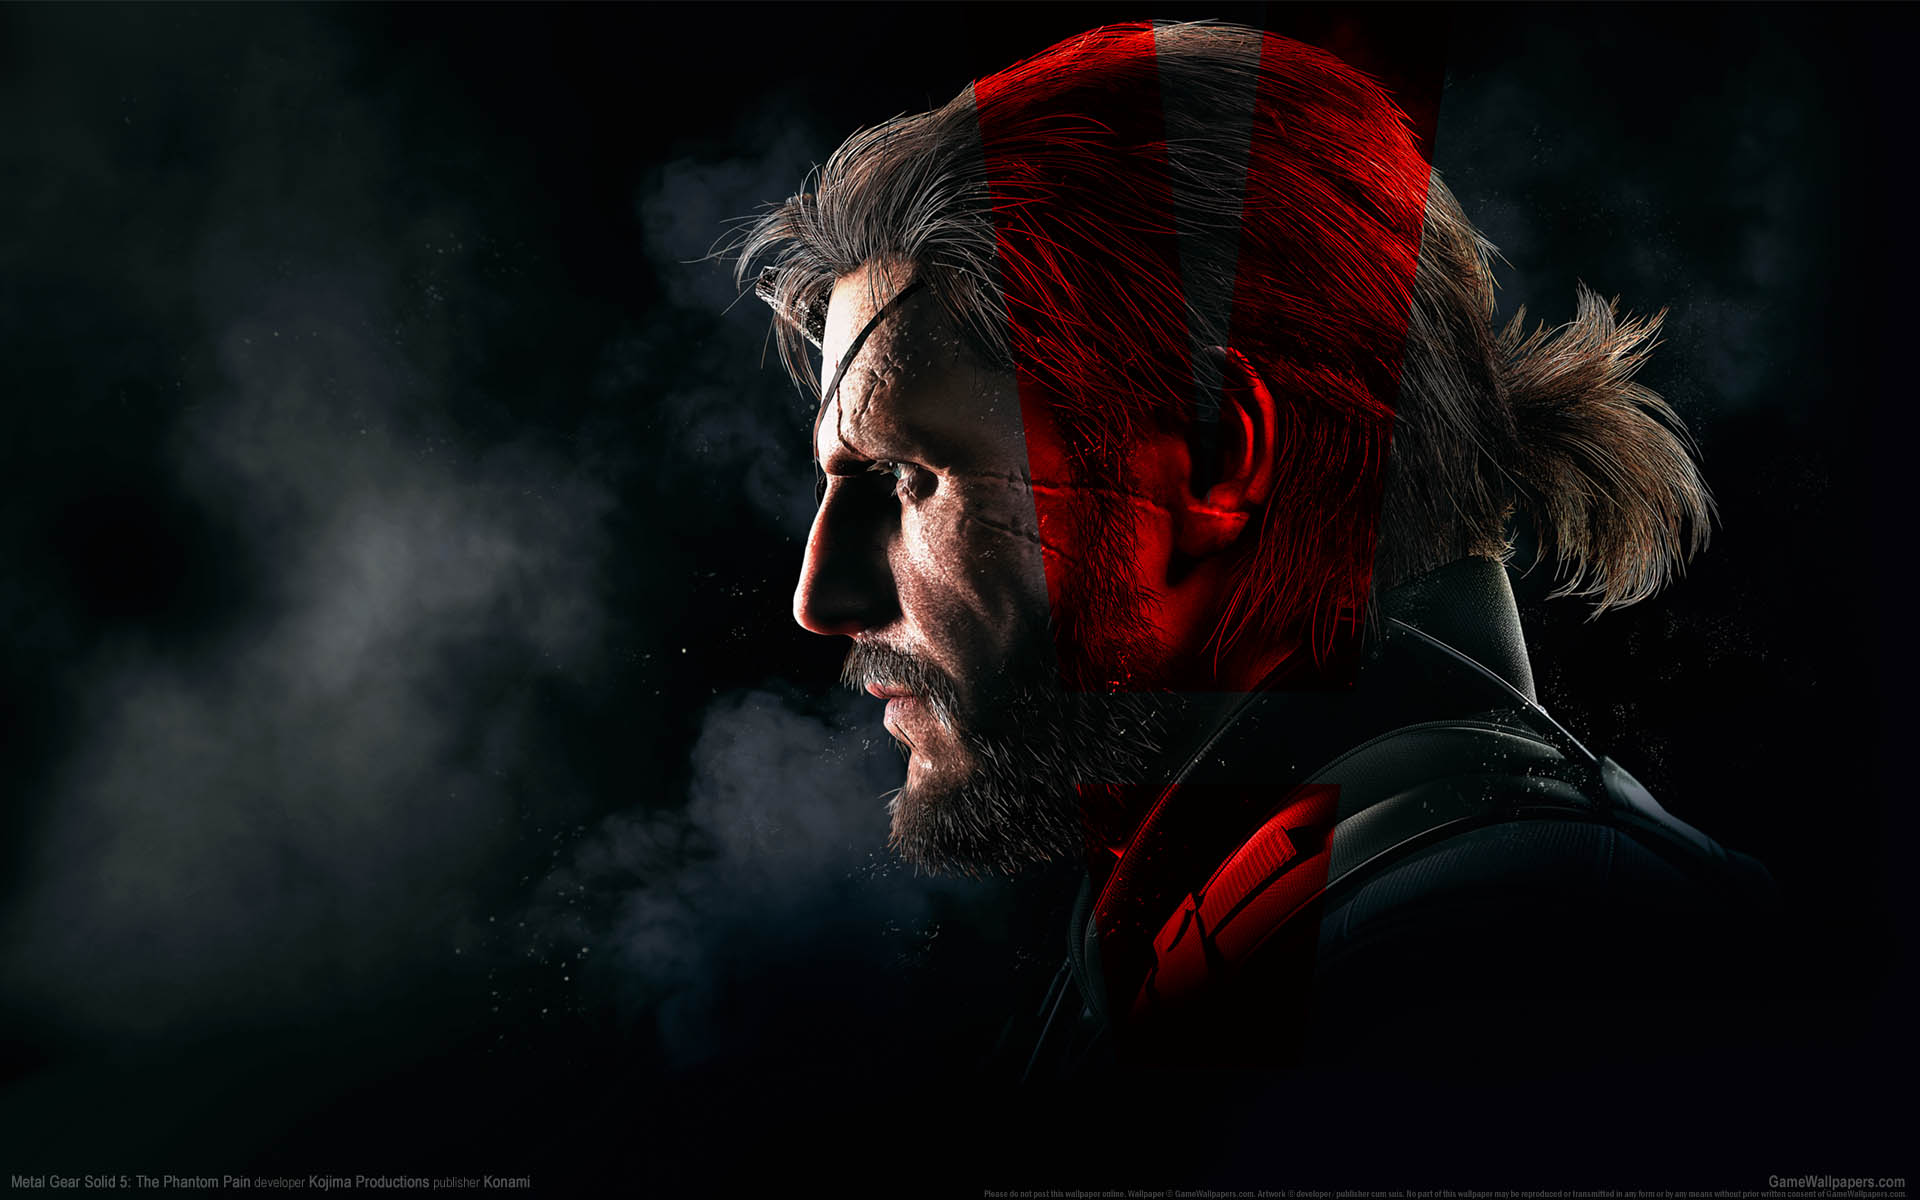 Metal Gear Solid 5: The Phantom Pain achtergrond 01 1920x1200